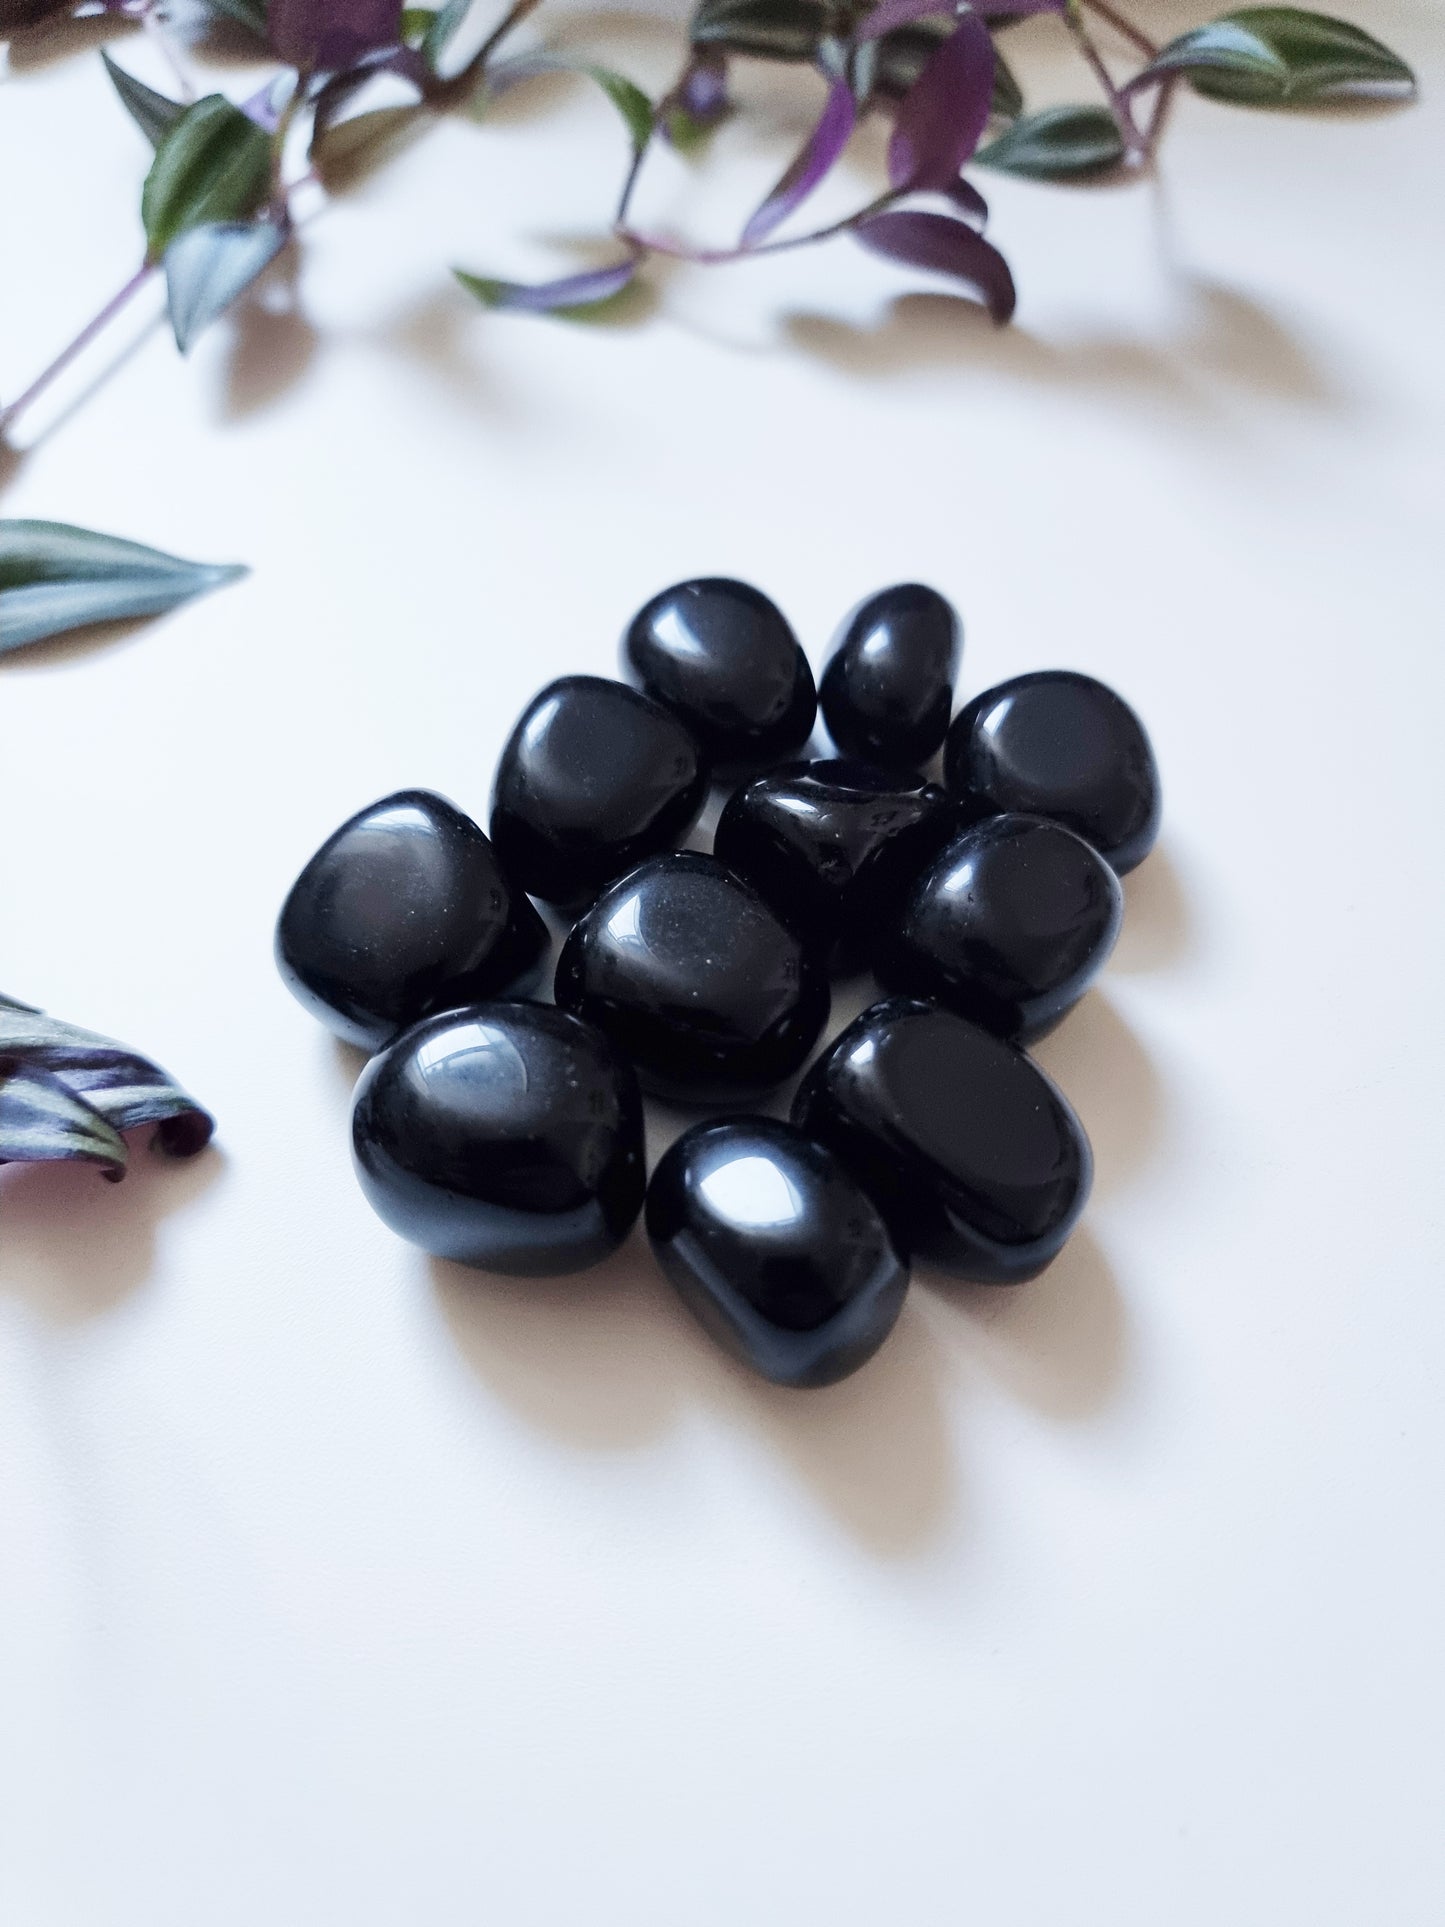 Black Obsidian - Truth, Introspection, Protection